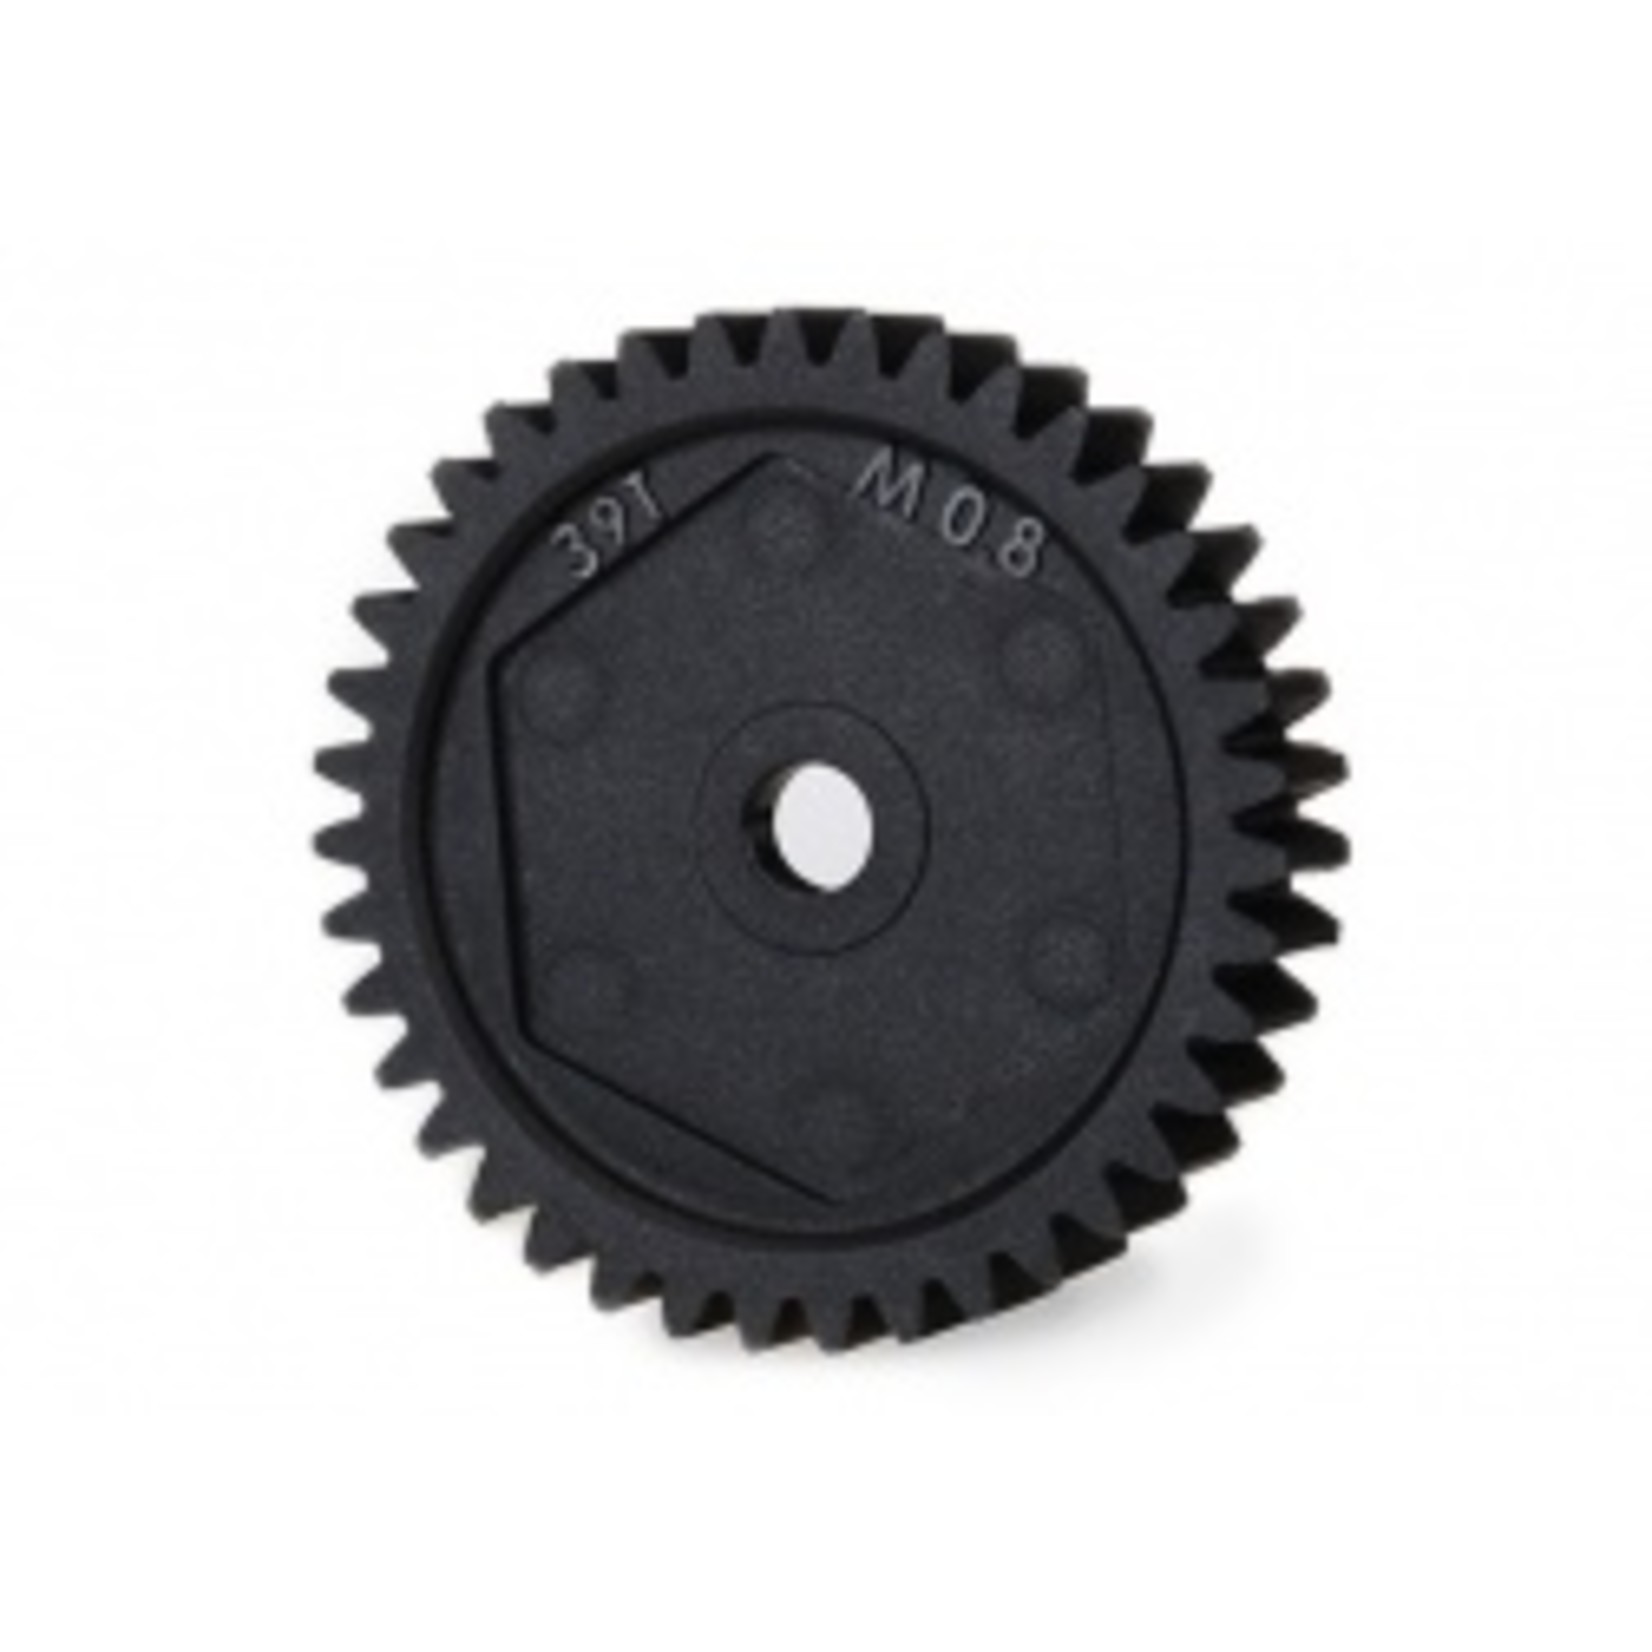 Traxxas Spur gear, 39-tooth (32-pitch)